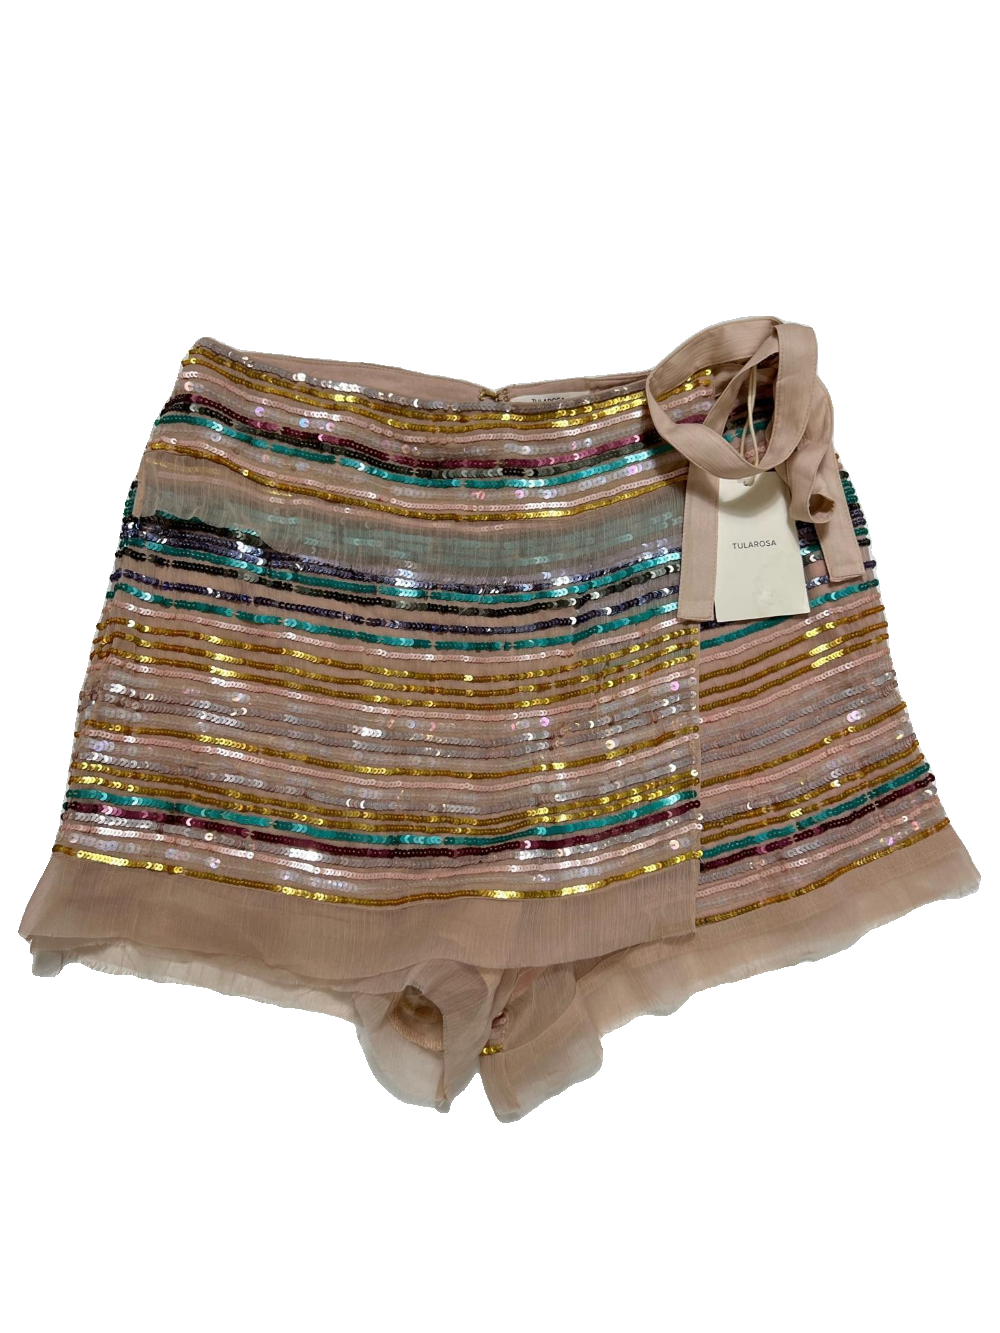 Tularosa - Sequin Multicolor Shorts - NEW WITH TAGS